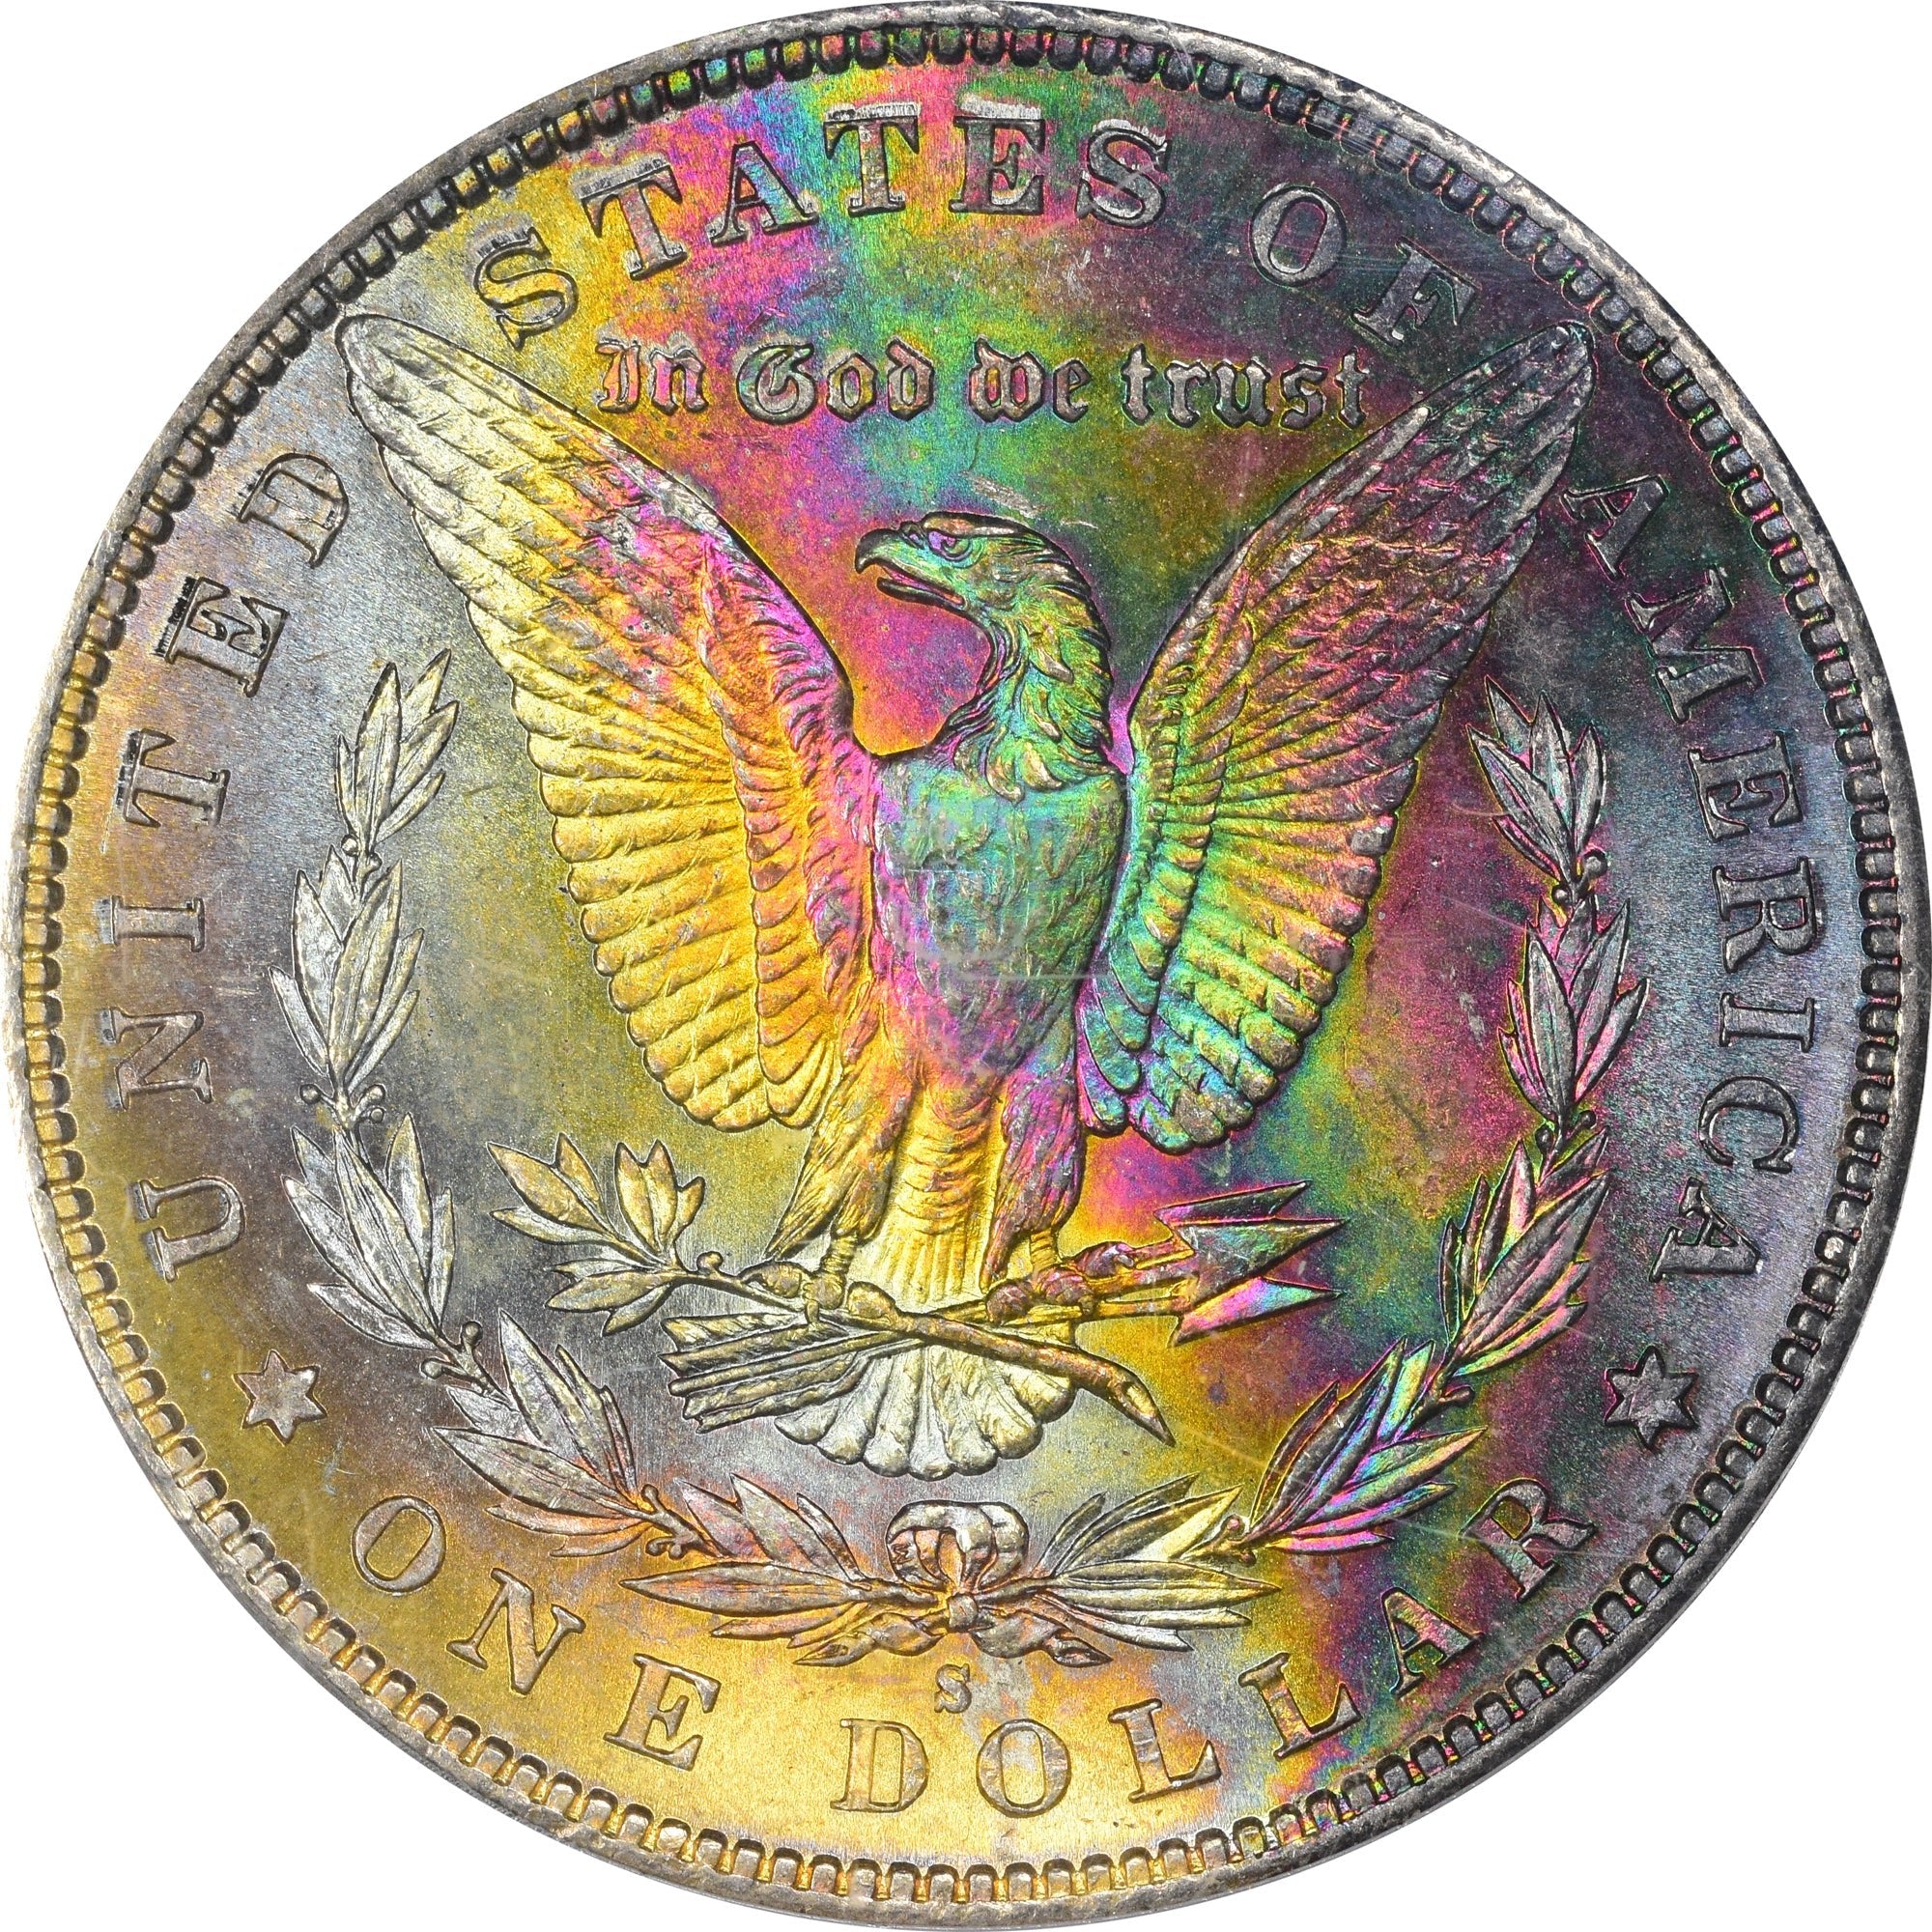 1882-S $1 MS64 OGH PCGS - Paradime Coins | PCGS NGC CACG CAC Rare US Numismatic Coins For Sale